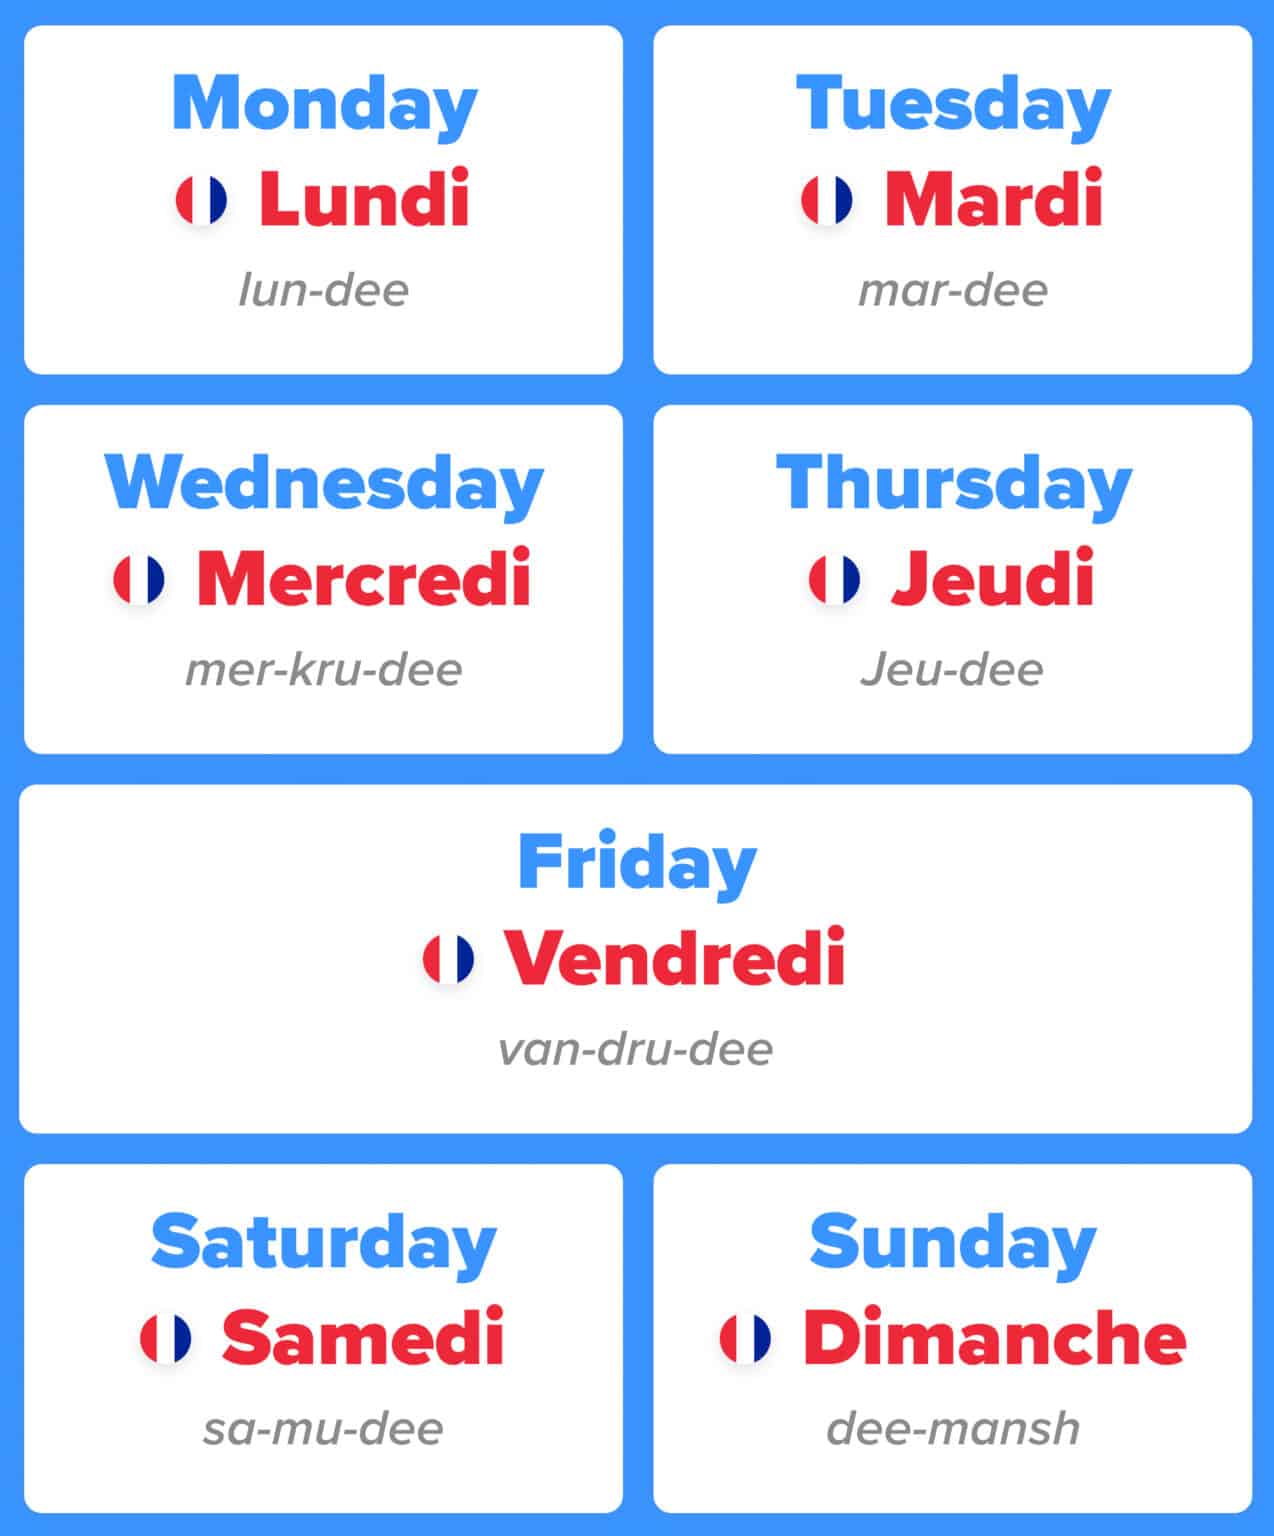 days-of-the-week-in-french-word-origins-tips-for-using-them-and-extra-vocabulary-fluentu-french